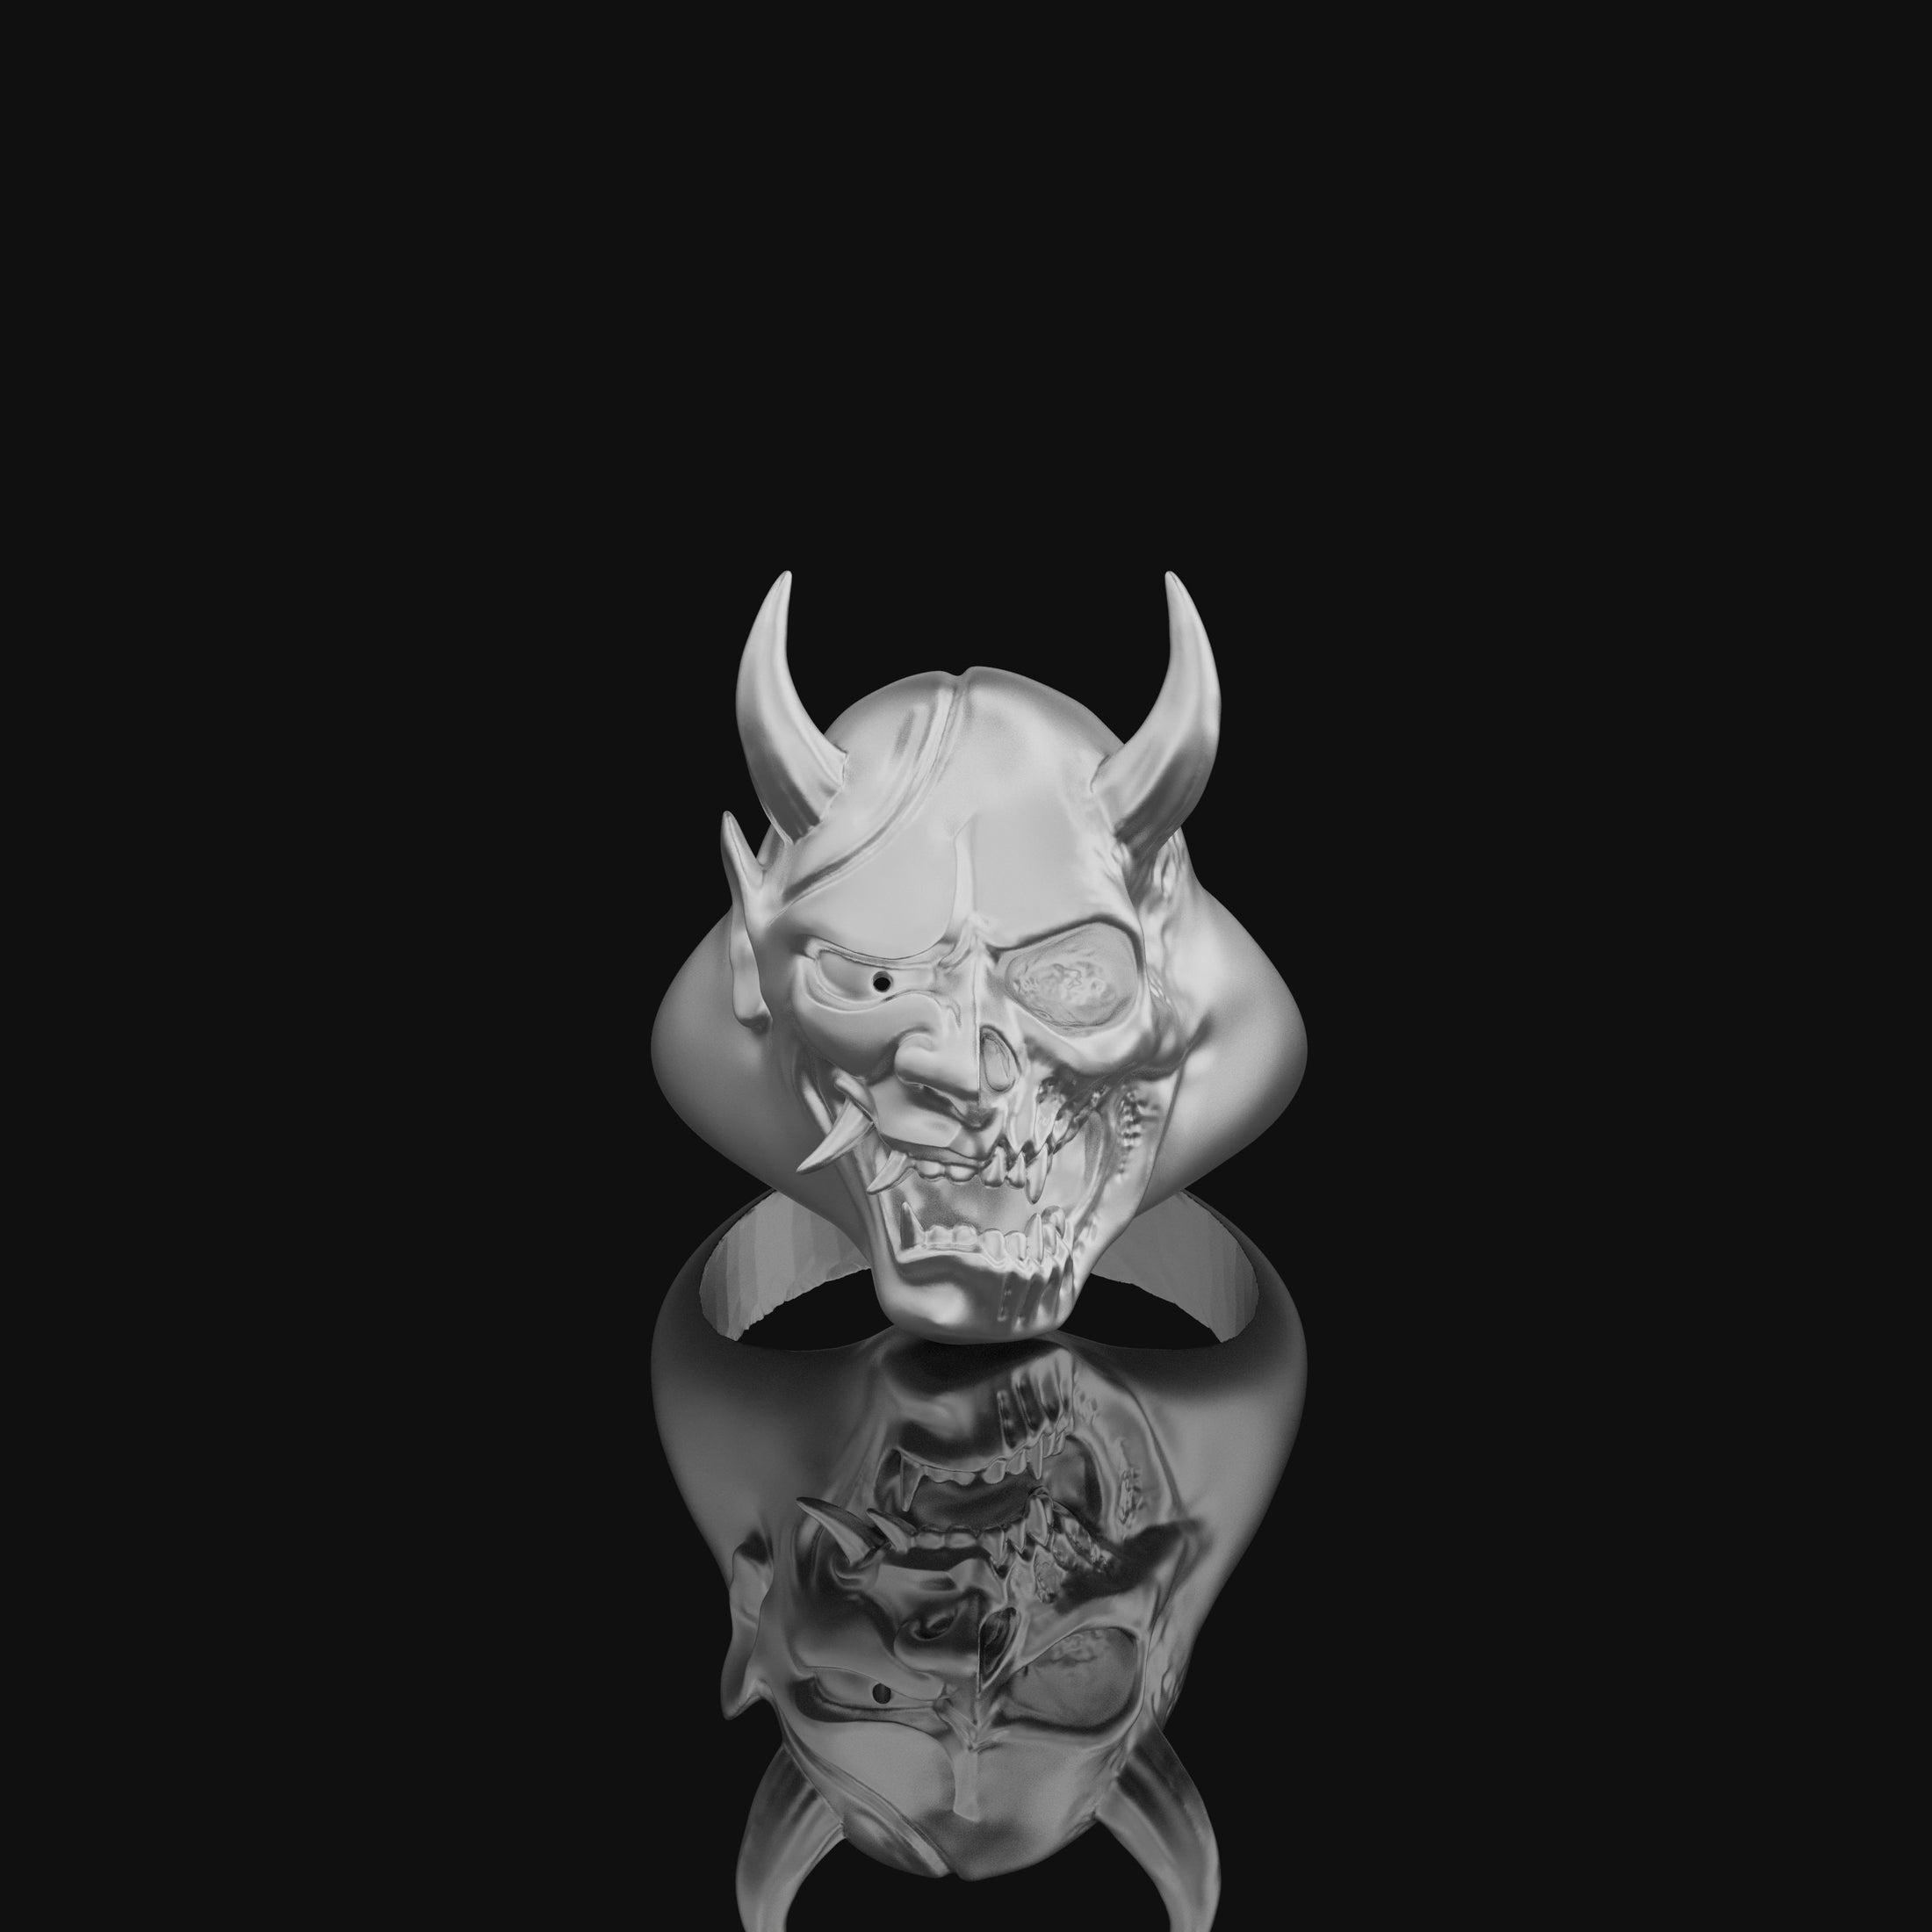 Silver Dead Oni Ring, Half-Breed Oni-Hannya Design, Japanese Skull Ring, Unique Yokai Inspired Jewelry, Cultural Mythology Piece Polished Finish